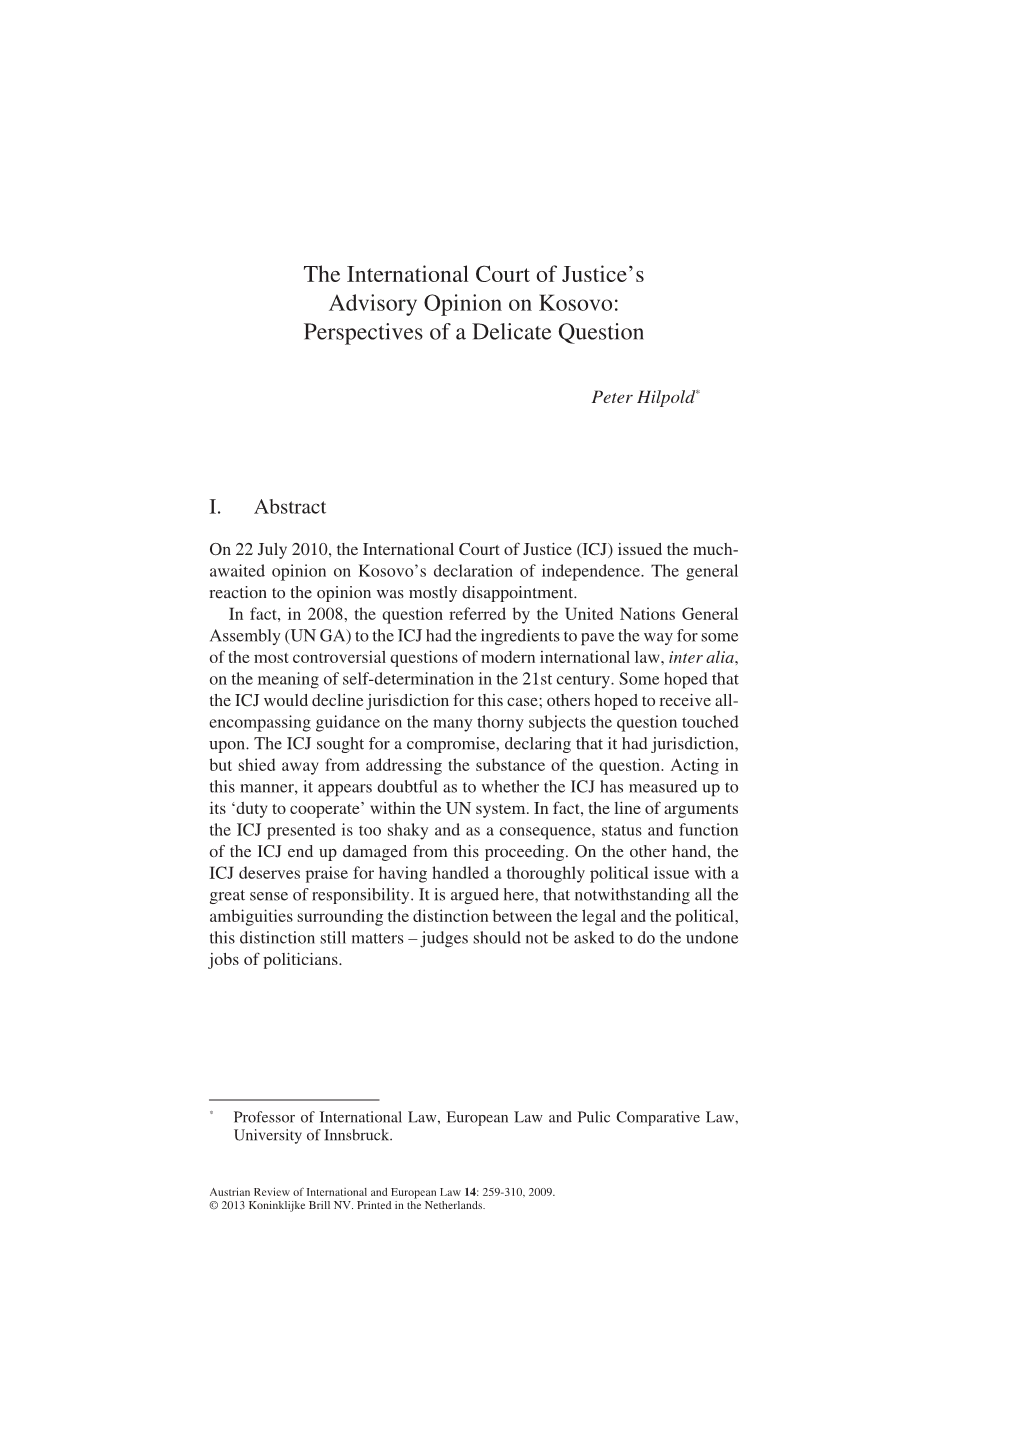 The International Court of Justice's Advisory Opinion on Kosovo: Perspectives of a Delicate Question